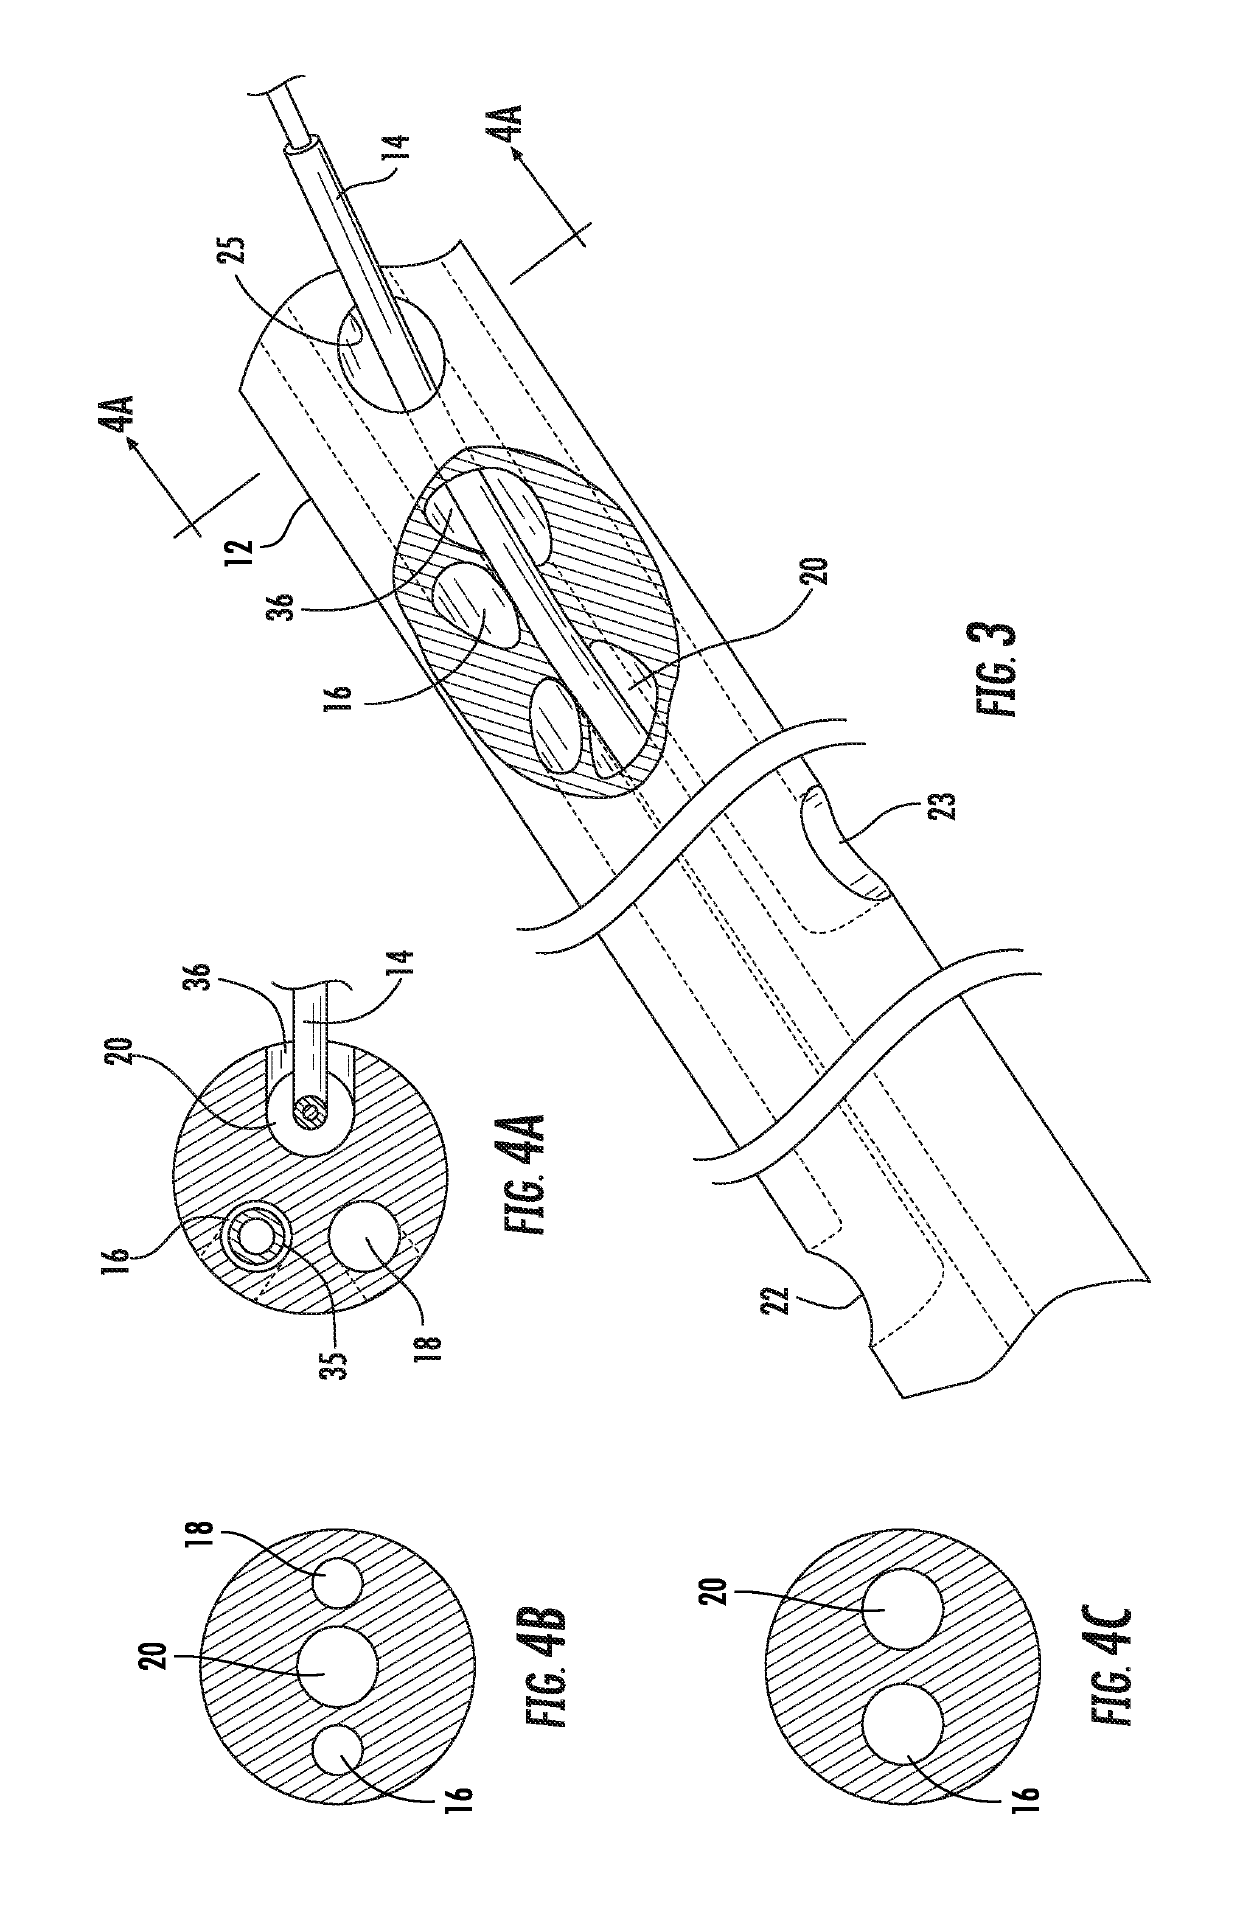 Rapid insertion integrated catheter and method of using an integrated catheter